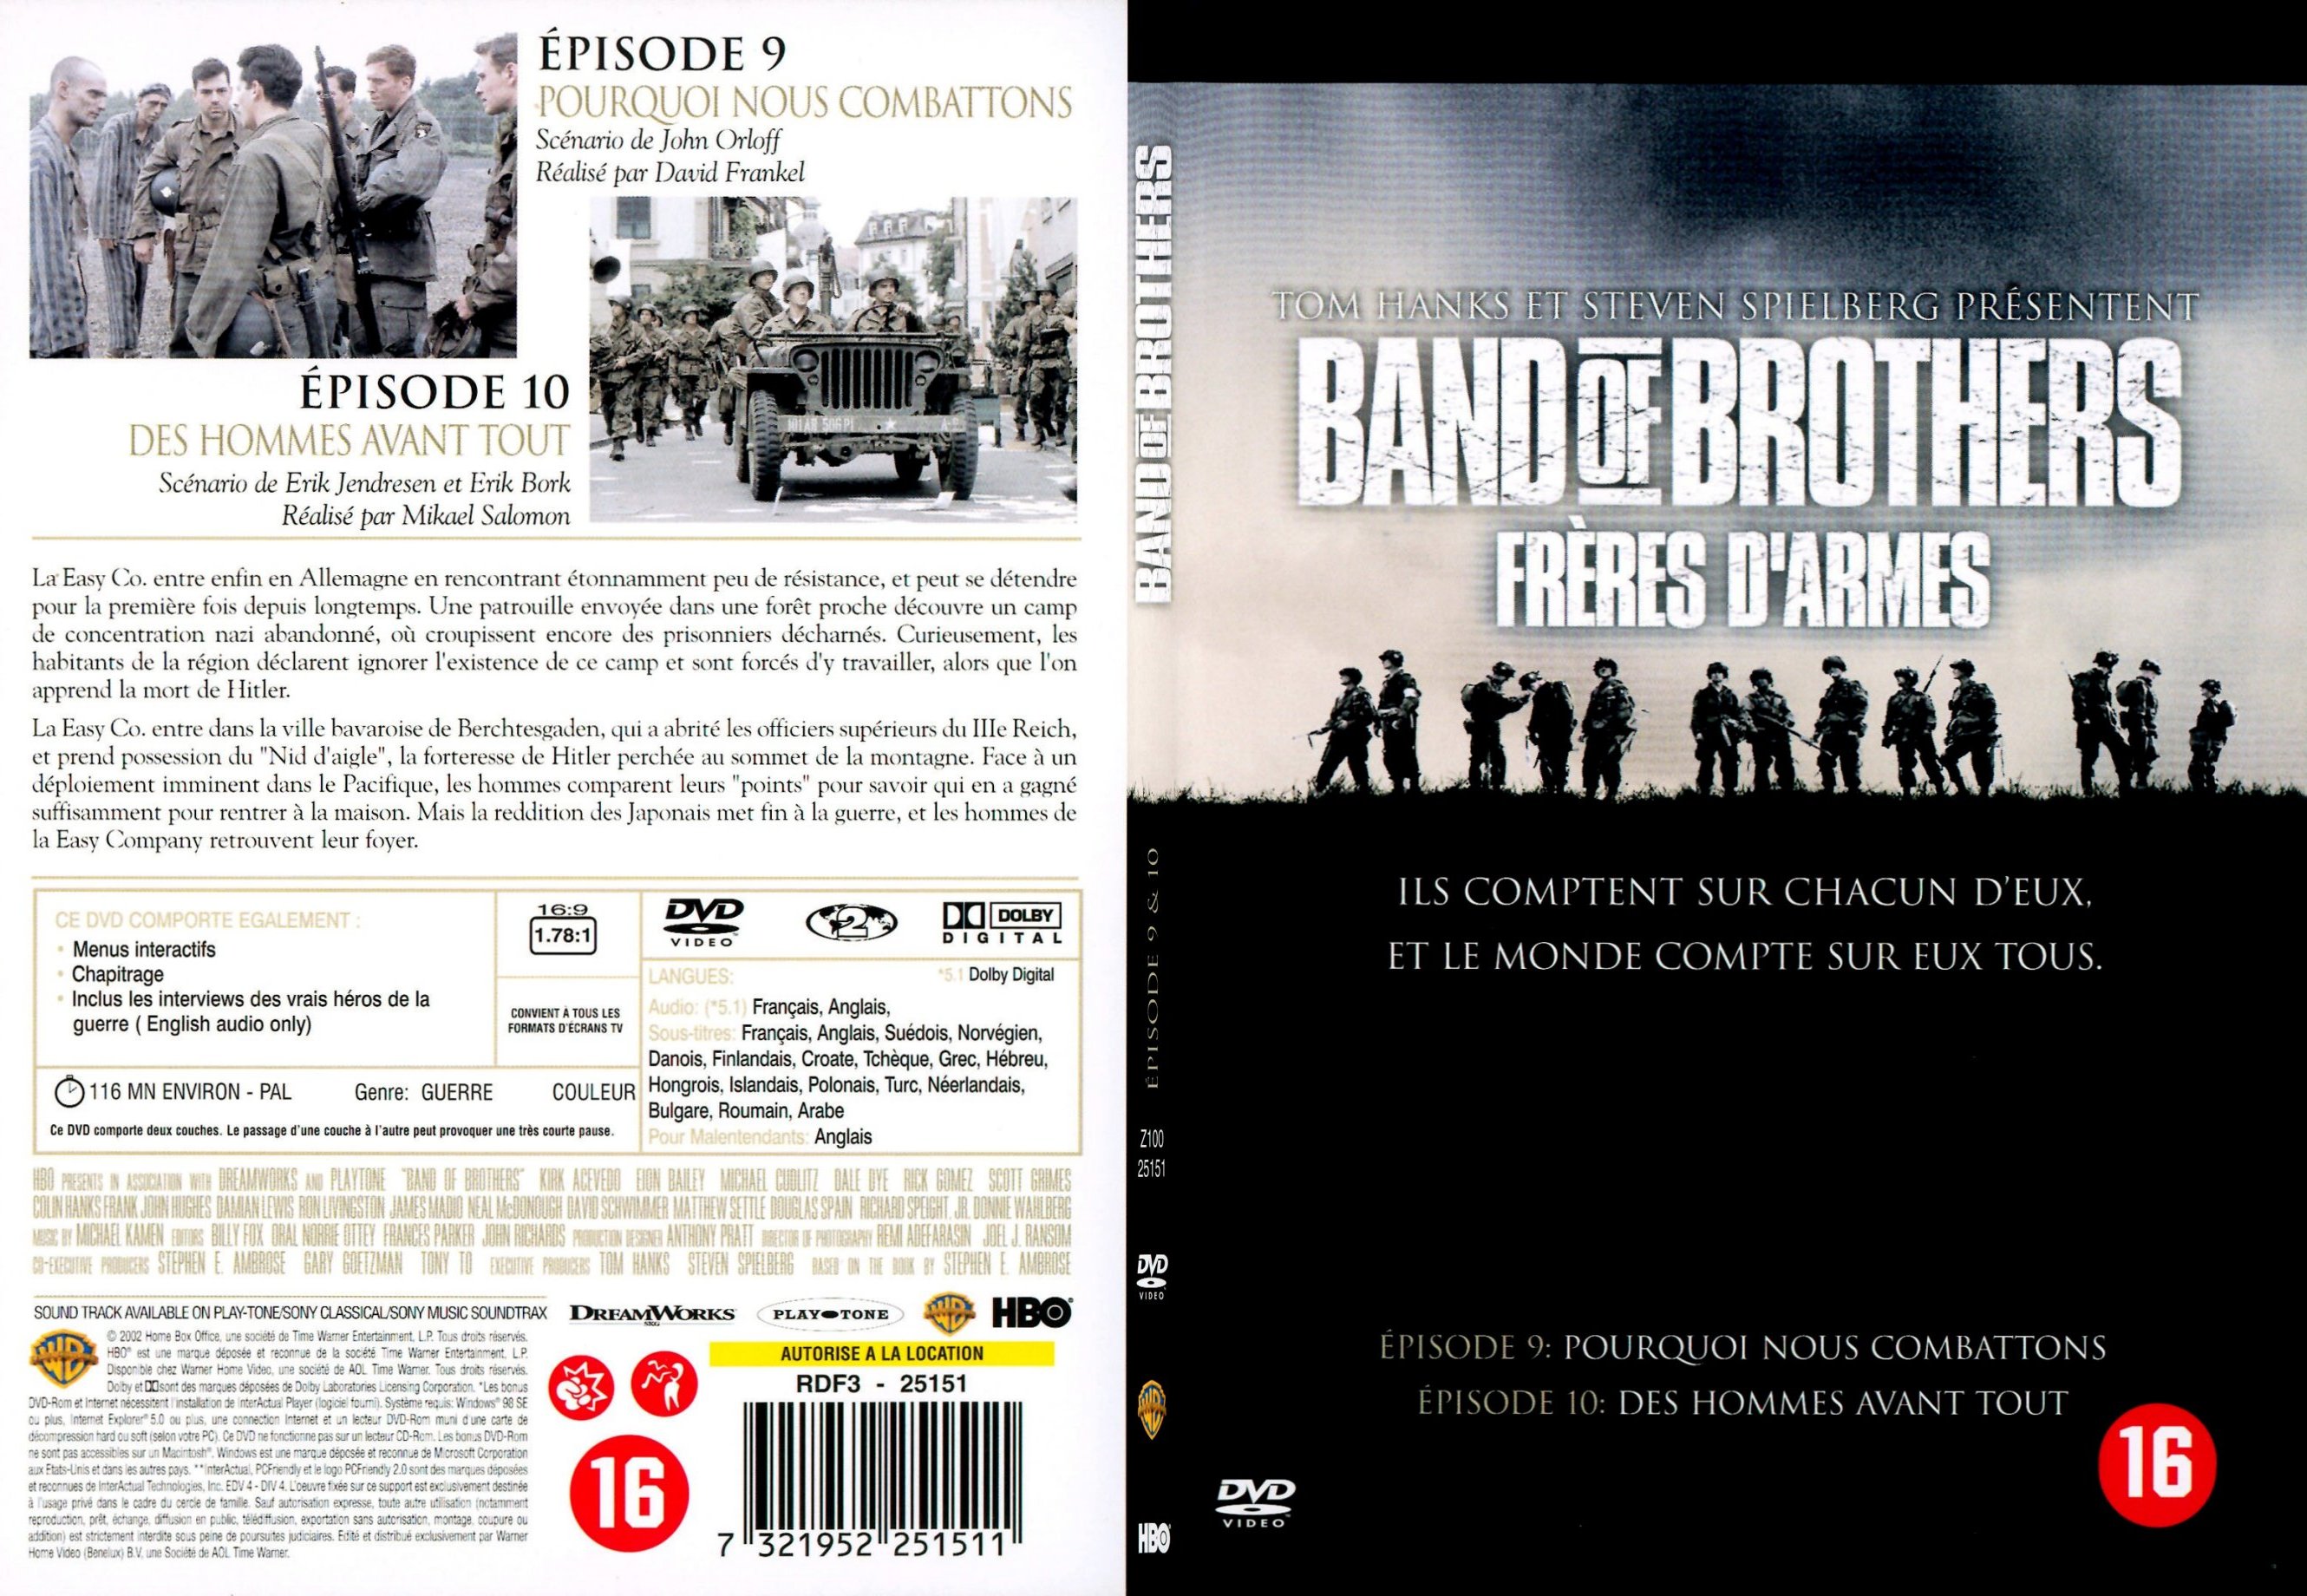 Jaquette DVD Band of brothers vol 5 - SLIM